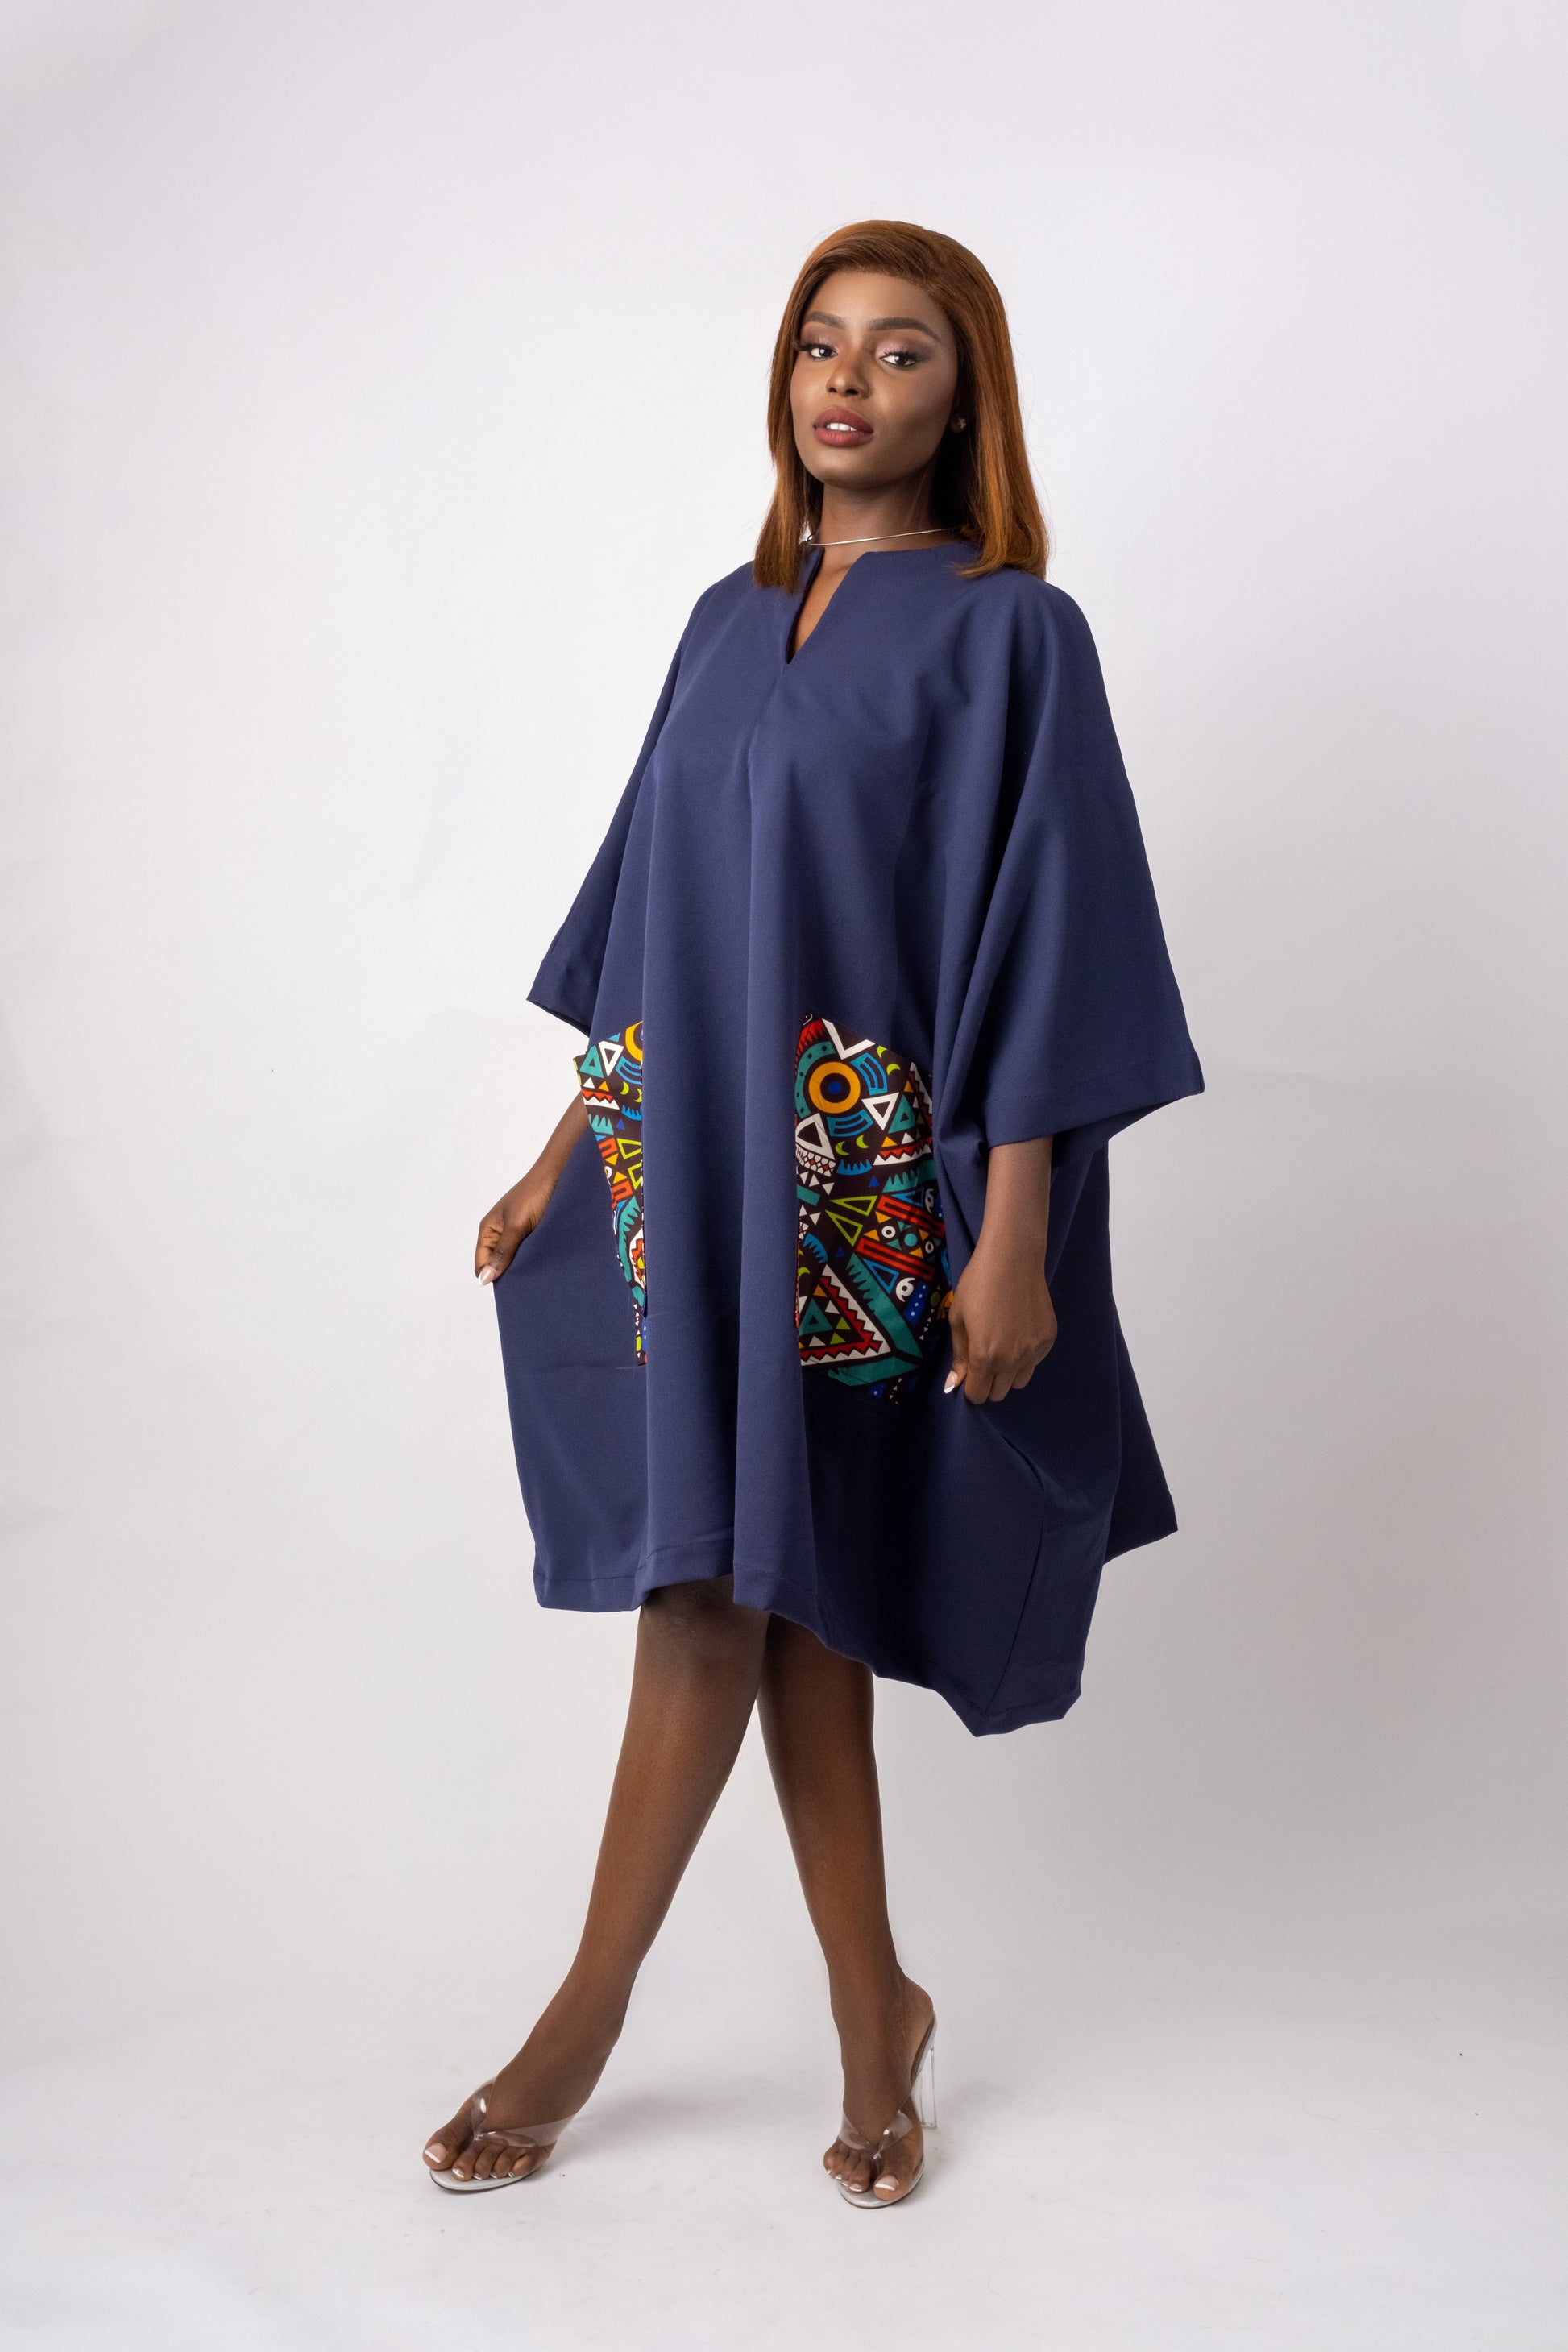 Navy blue tunic with two front pockets embellished with geometric ankara/african print fabric.